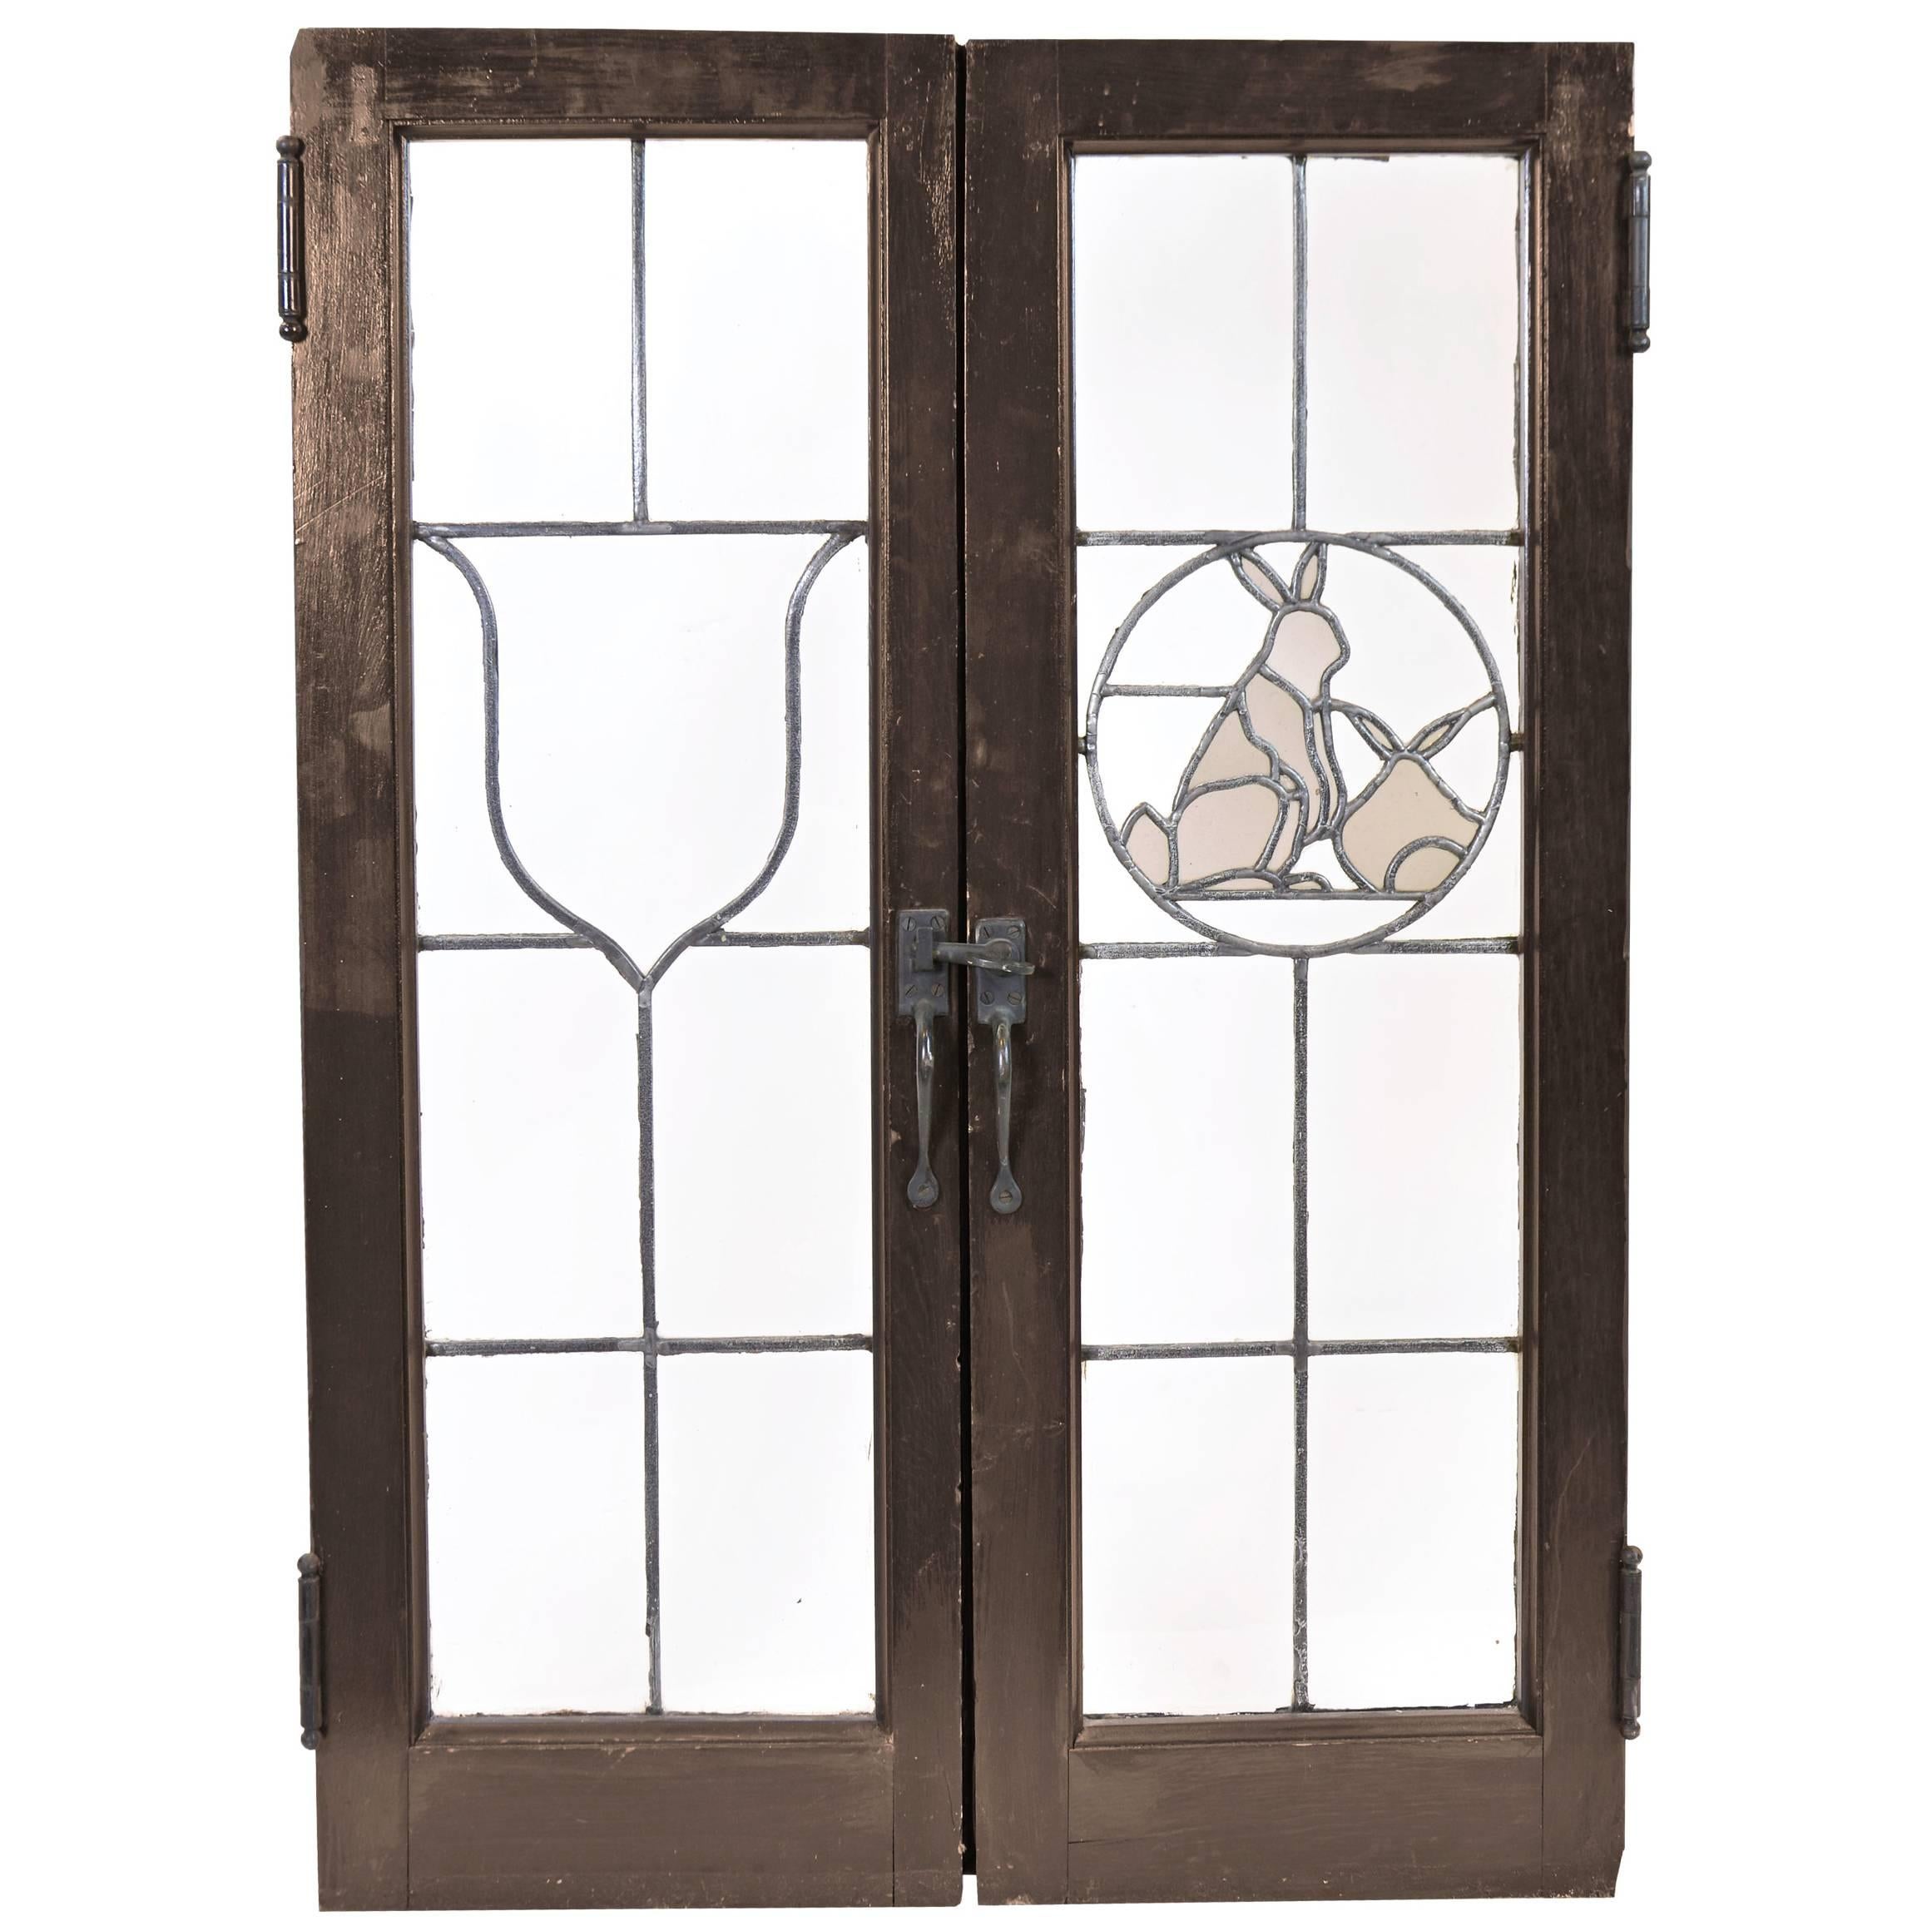 Set of Eight Tudor French Windows with Leaded Glass Emblems, circa 1915